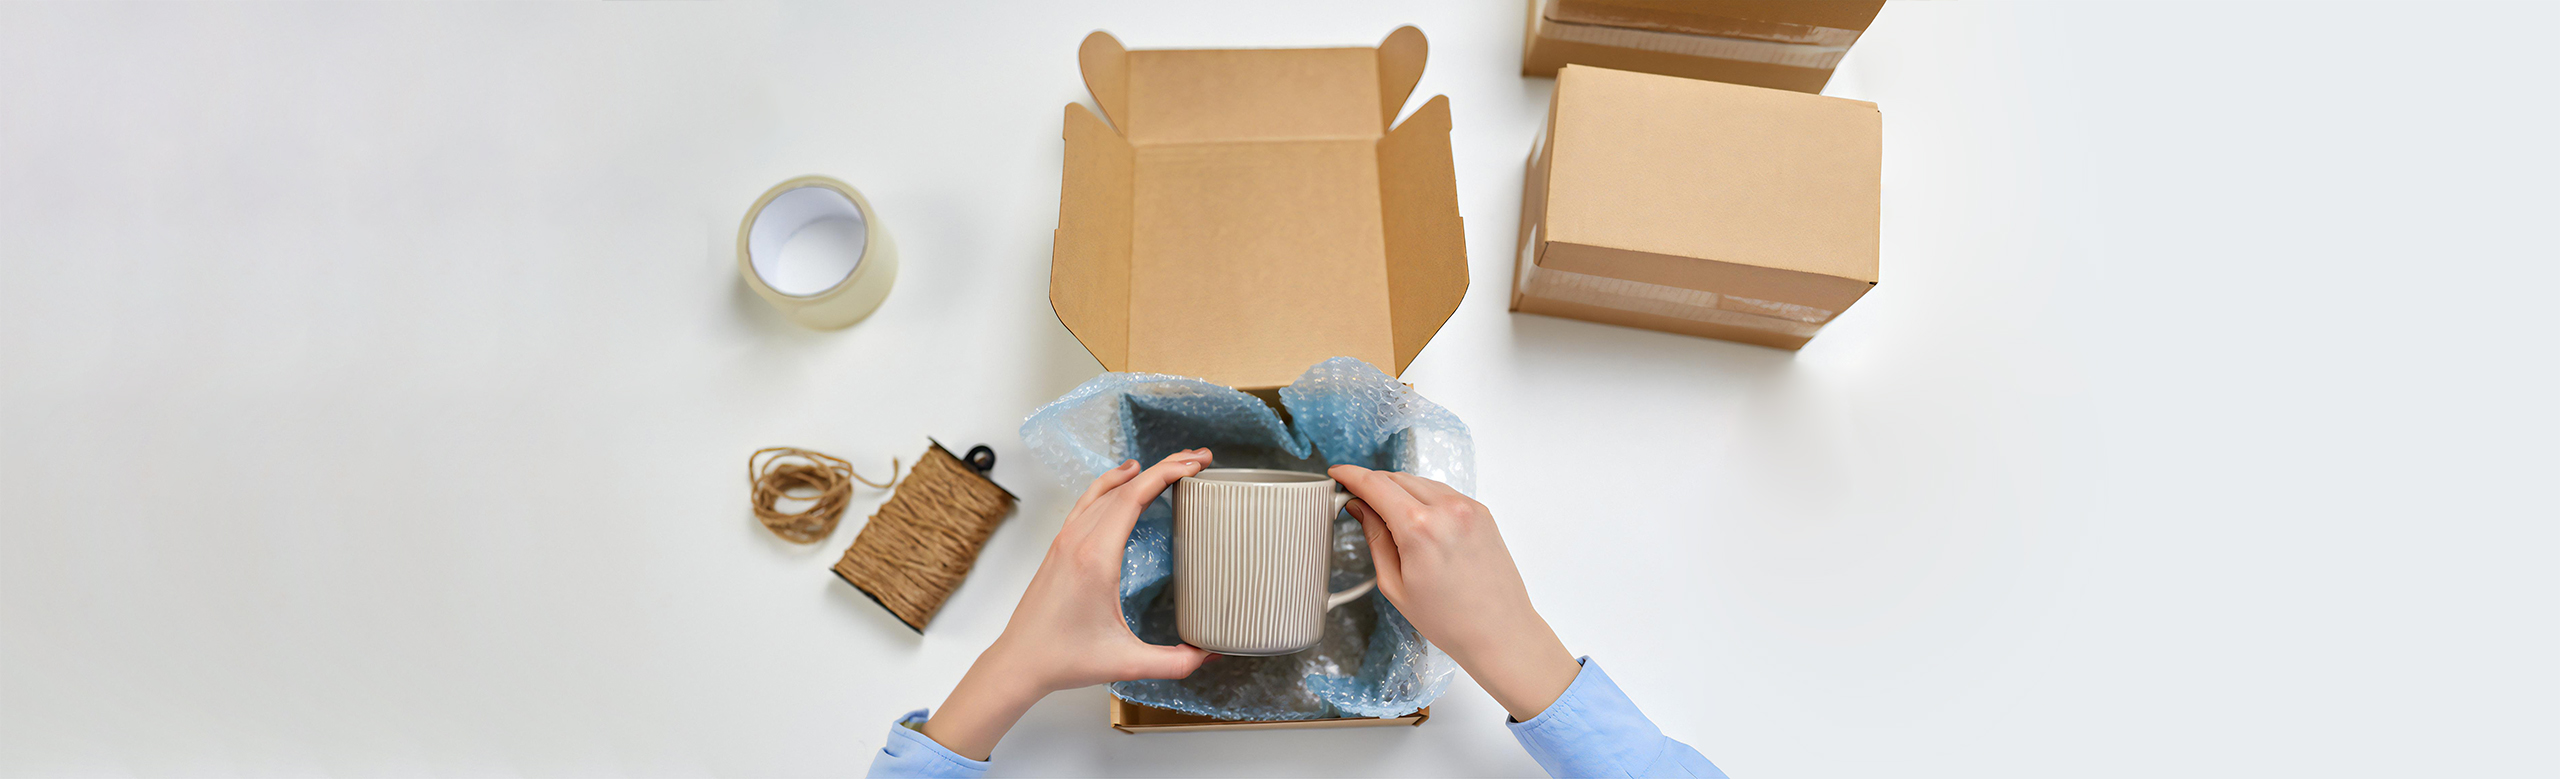 How to Ship a Coffee mug without it breaking